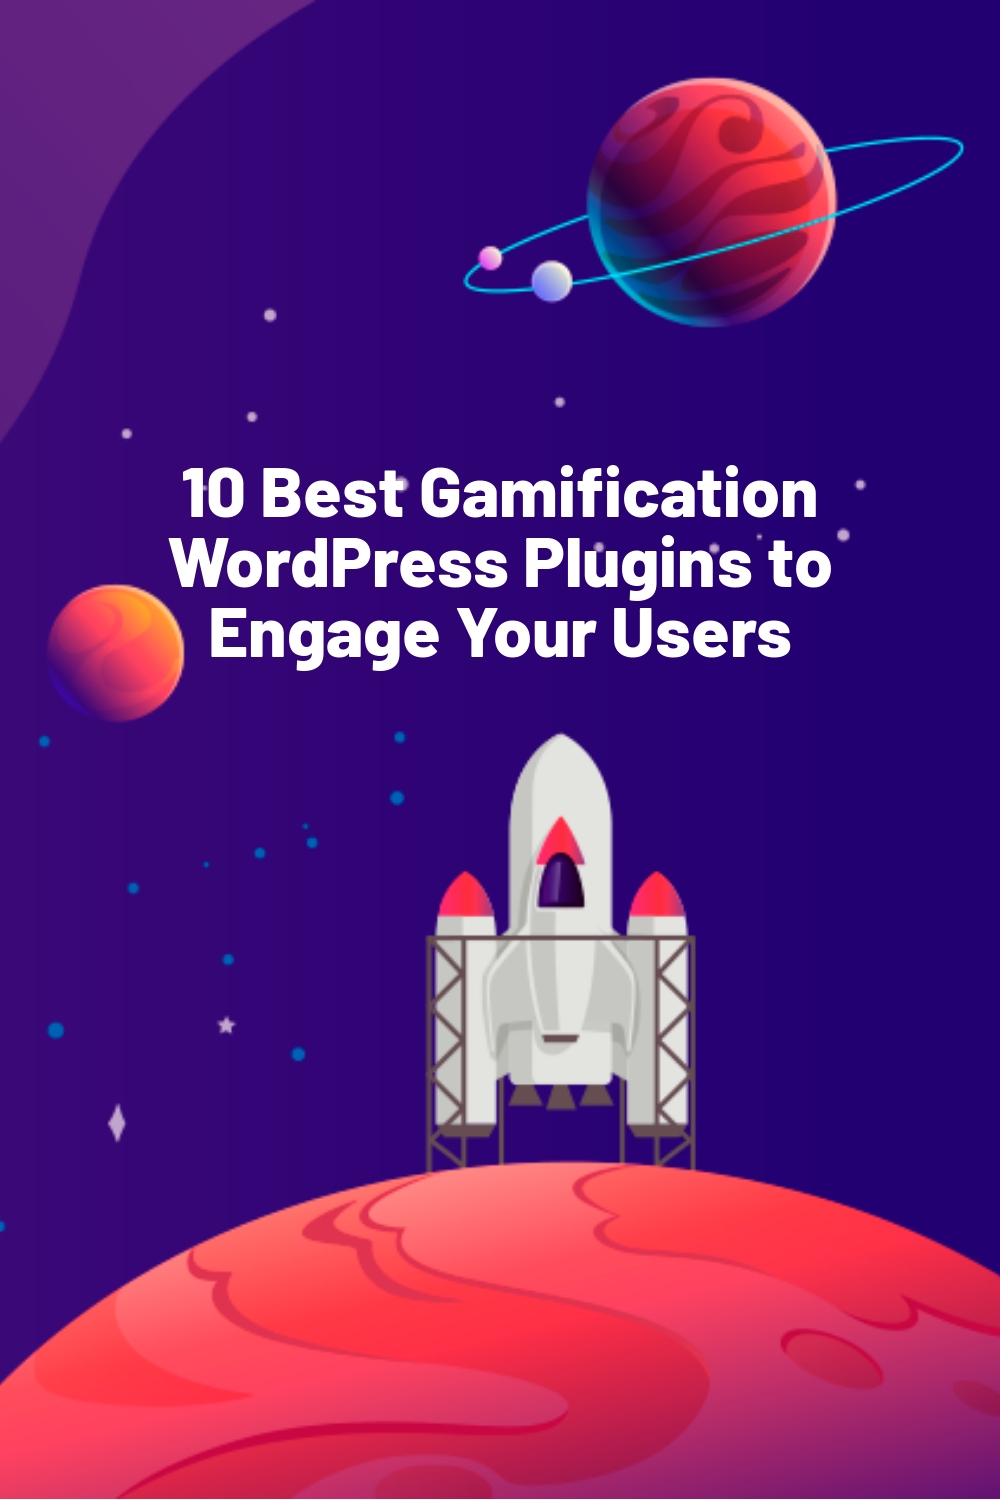 10 Best Gamification WordPress Plugins to Engage Your Users